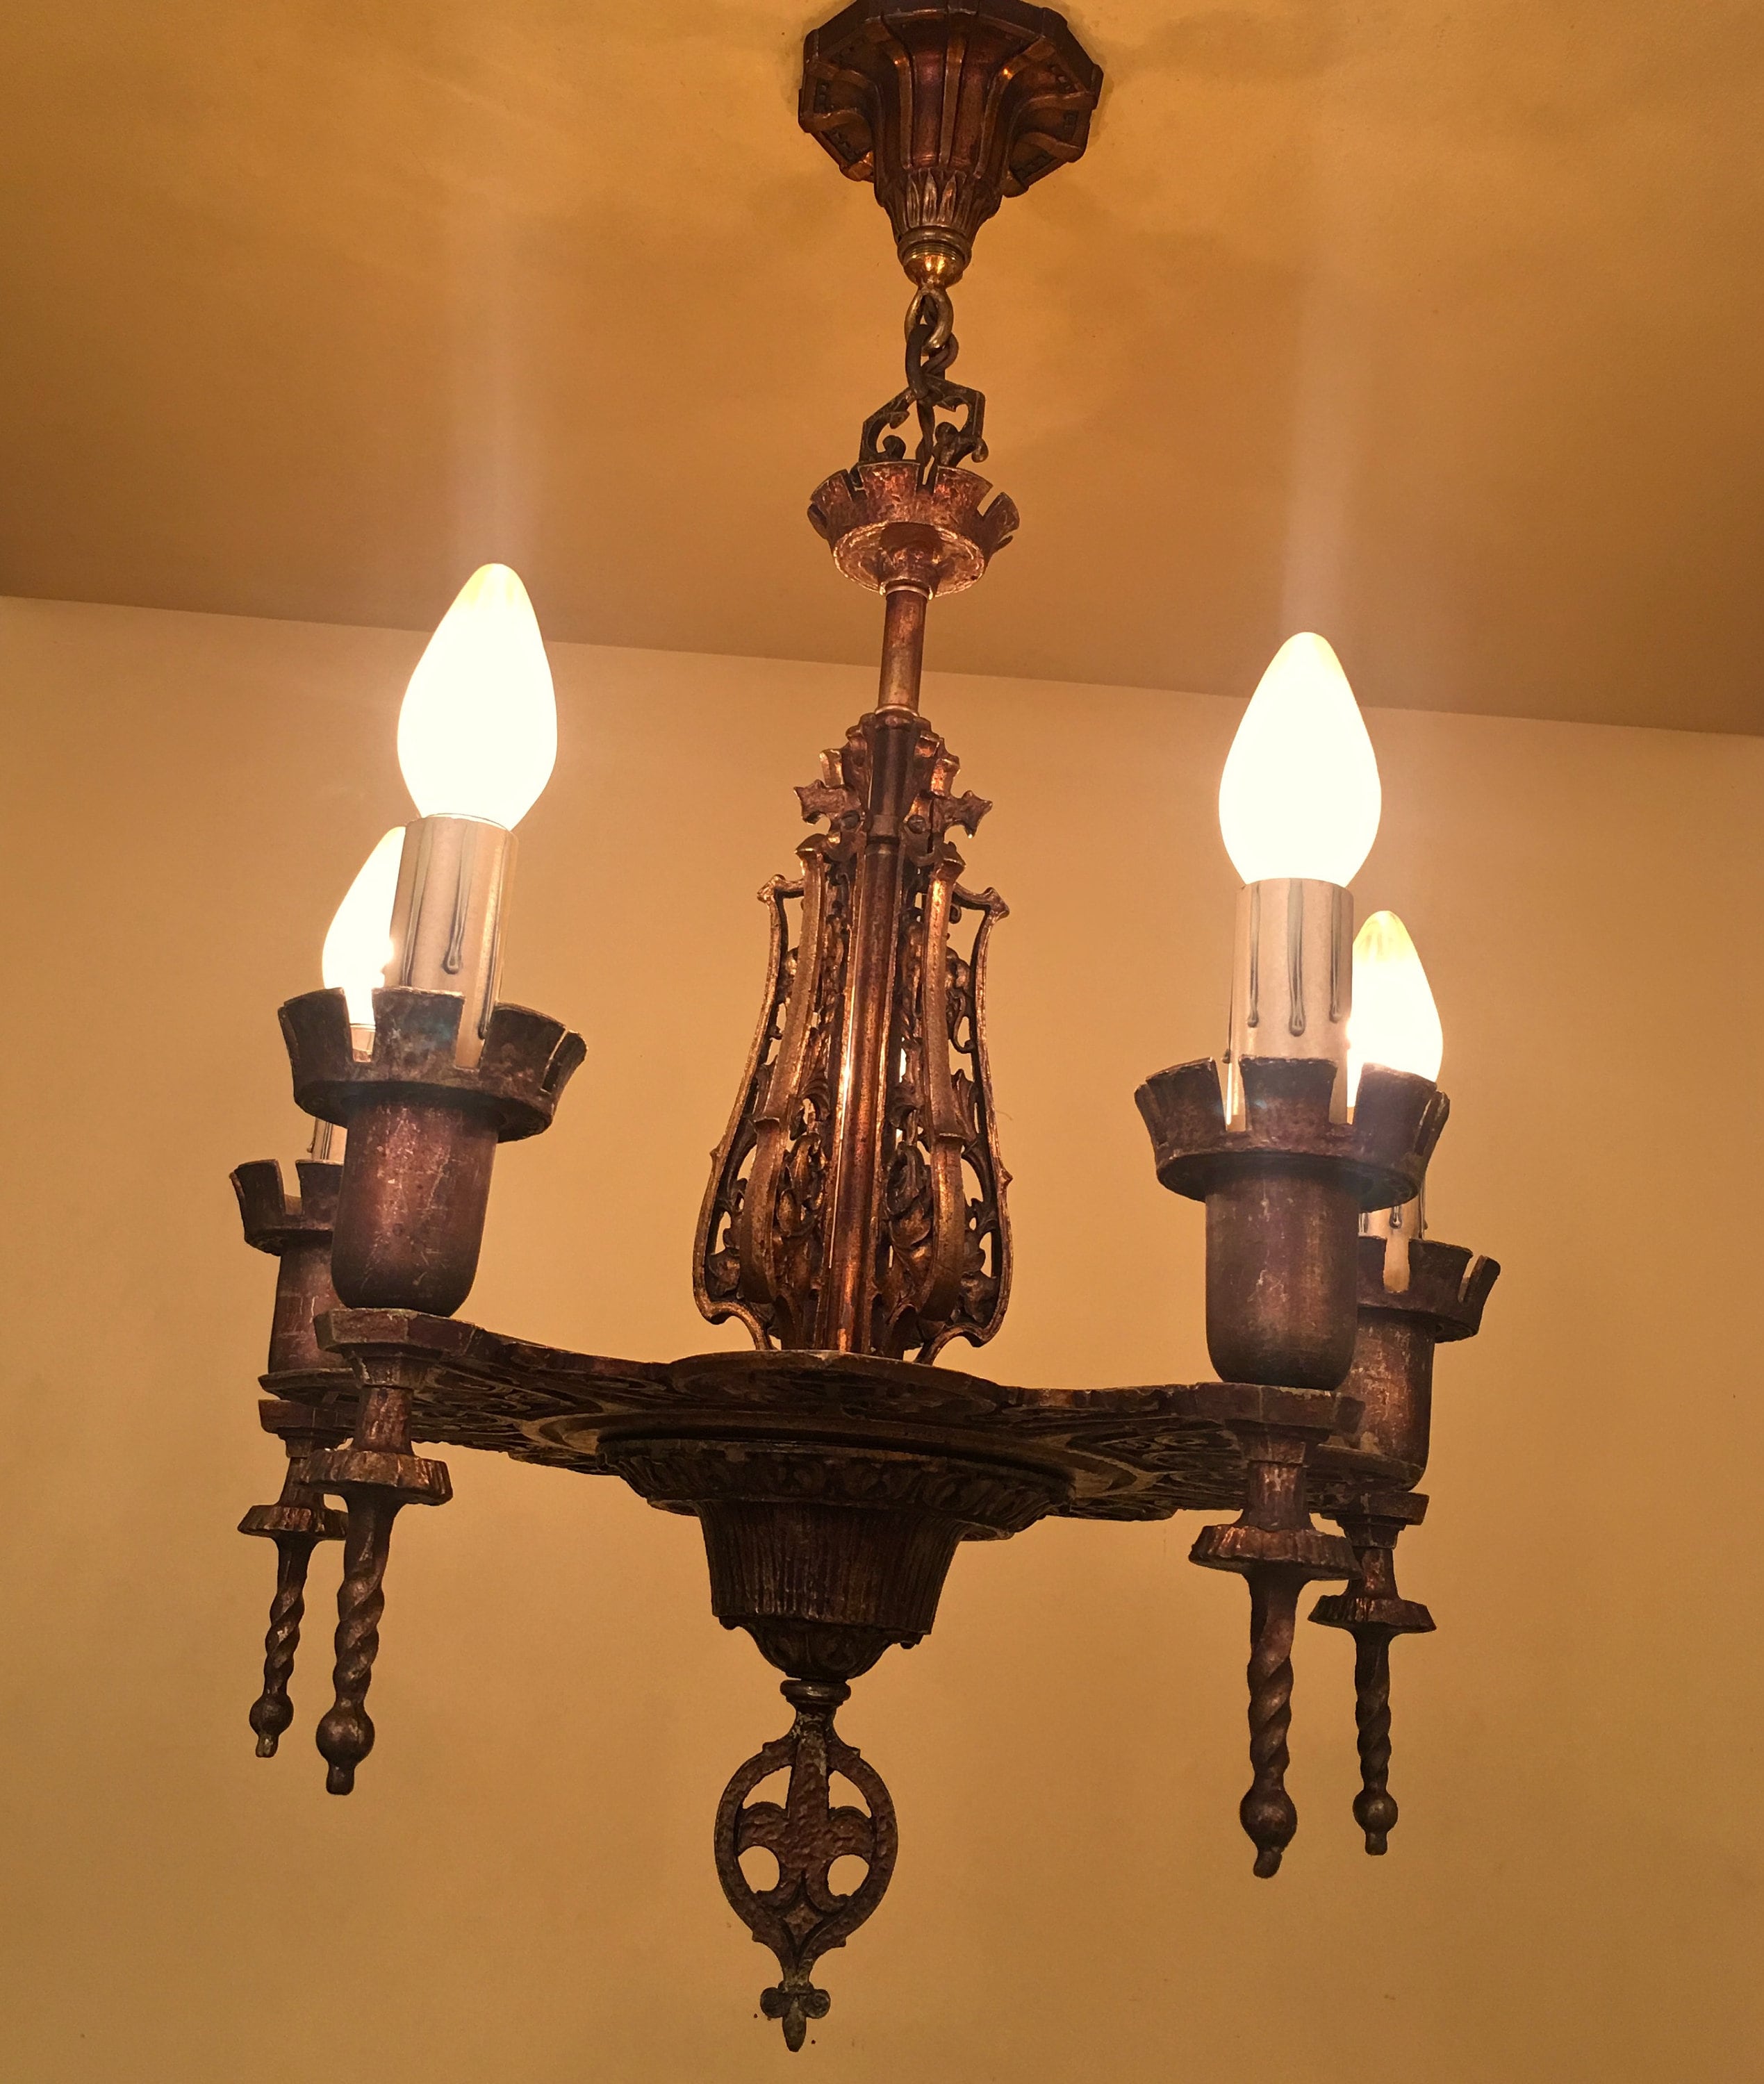 Vintage Lighting 1910 pull chain ceiling fixture. Roses! Rewired